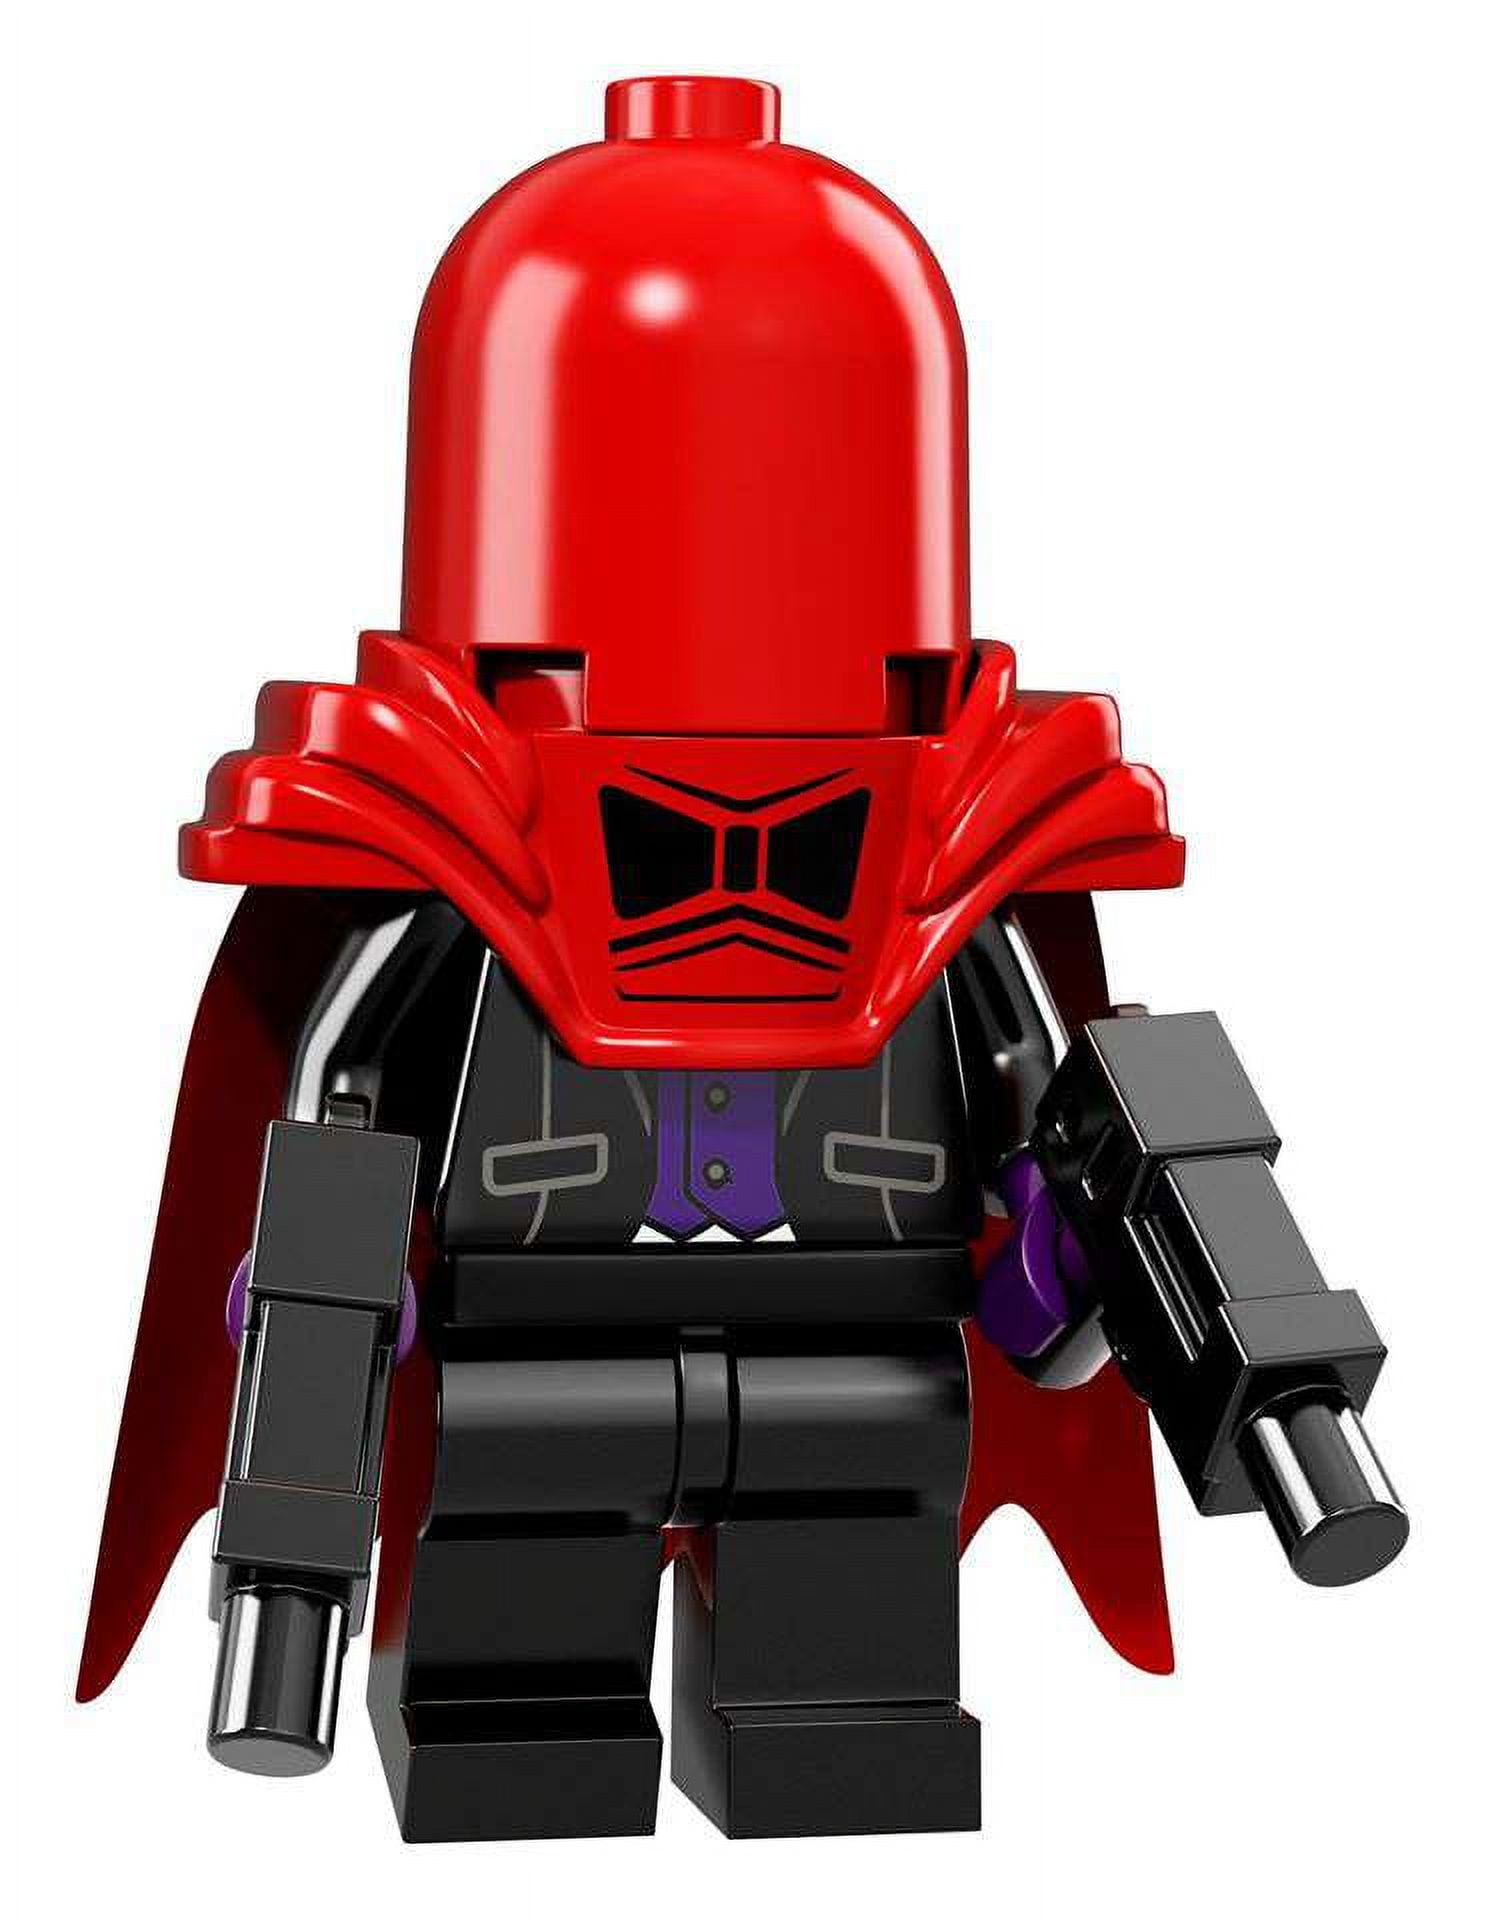 Check out the characters from LEGO Batman Movie Minifigures Series